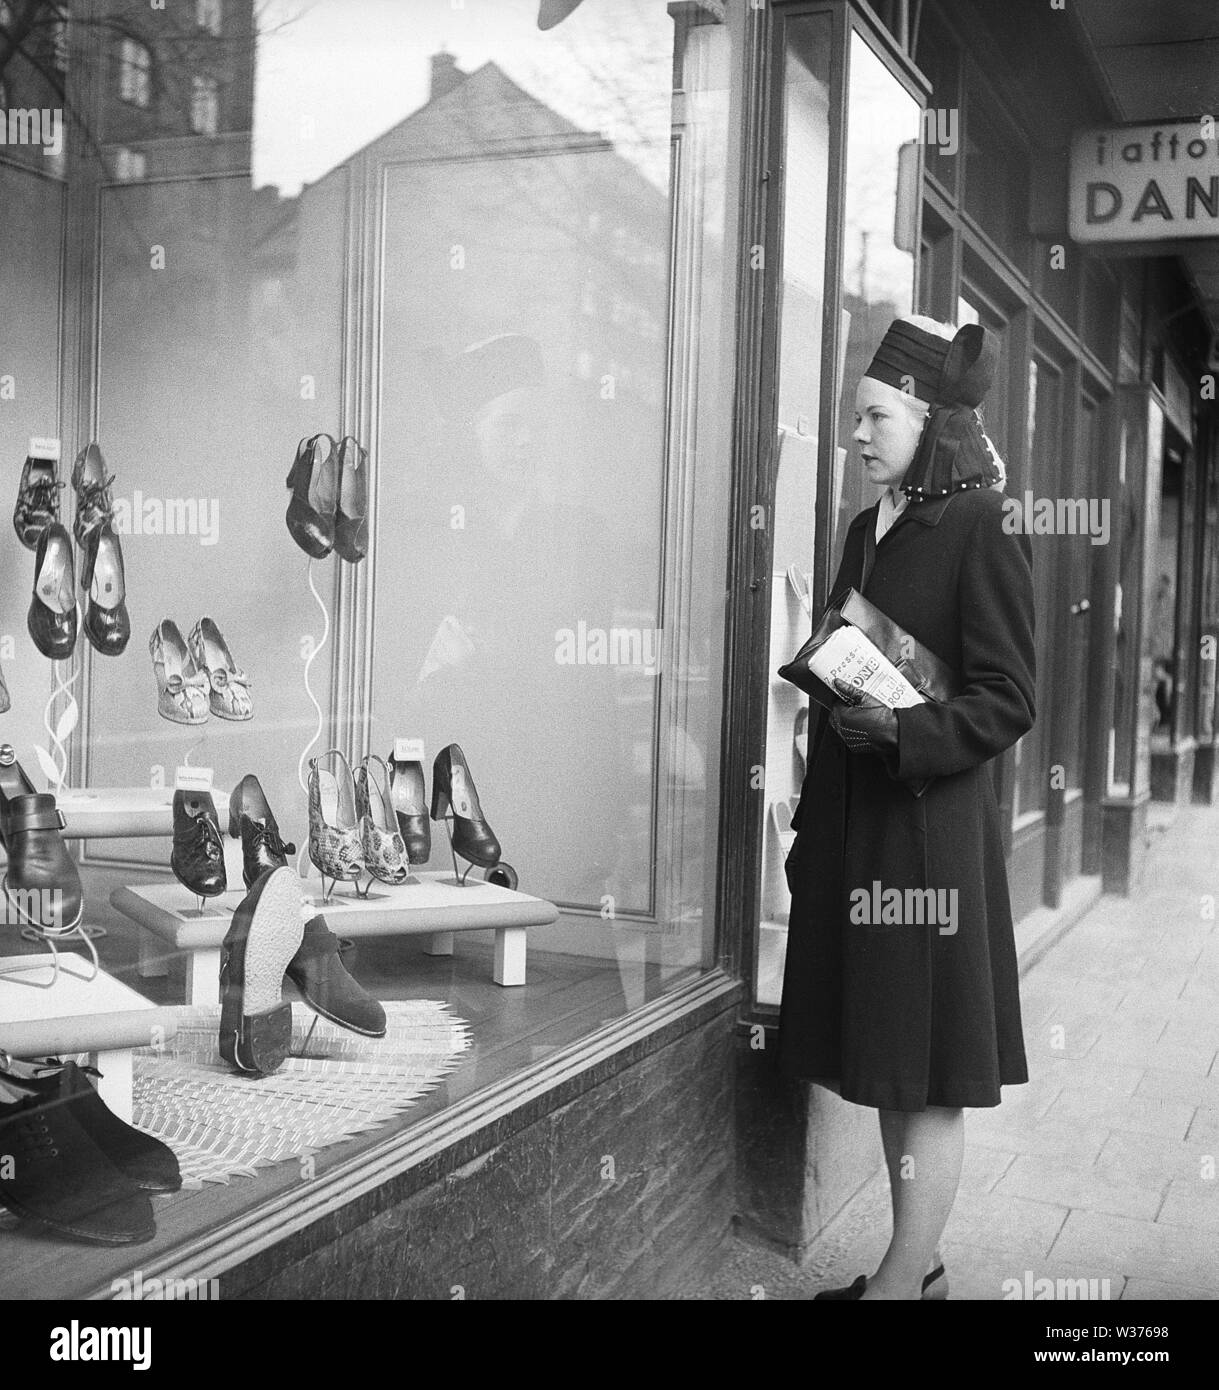 Window shopping in the 1940s. A woman is standing outside a boutique displaying the latest fashion in women's shoes. She is wearing a dark coat and a matching fashionable hat. Sweden 1946. Kristoffersson AB21-12 Stock Photo